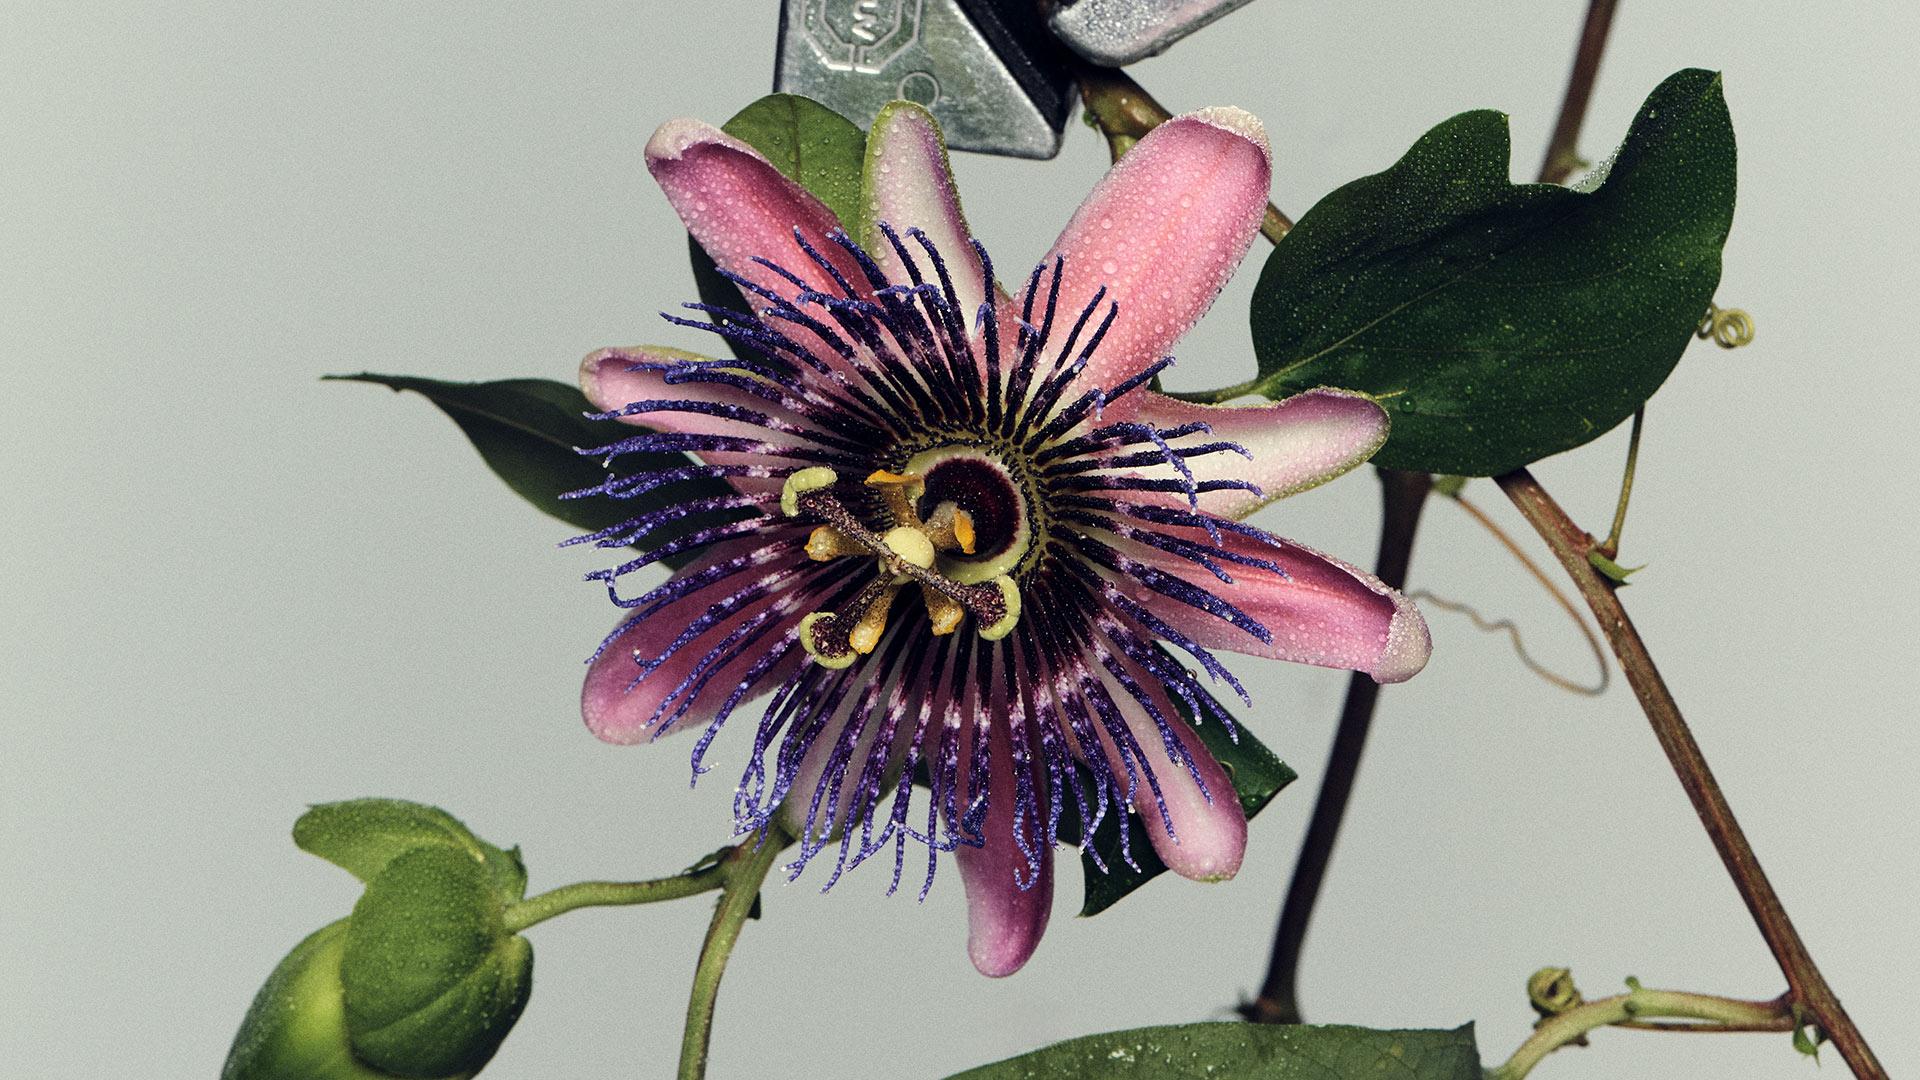 Close up image of a Harklinikken ingredient purple passionfruit flower extract help up by a metal clamp